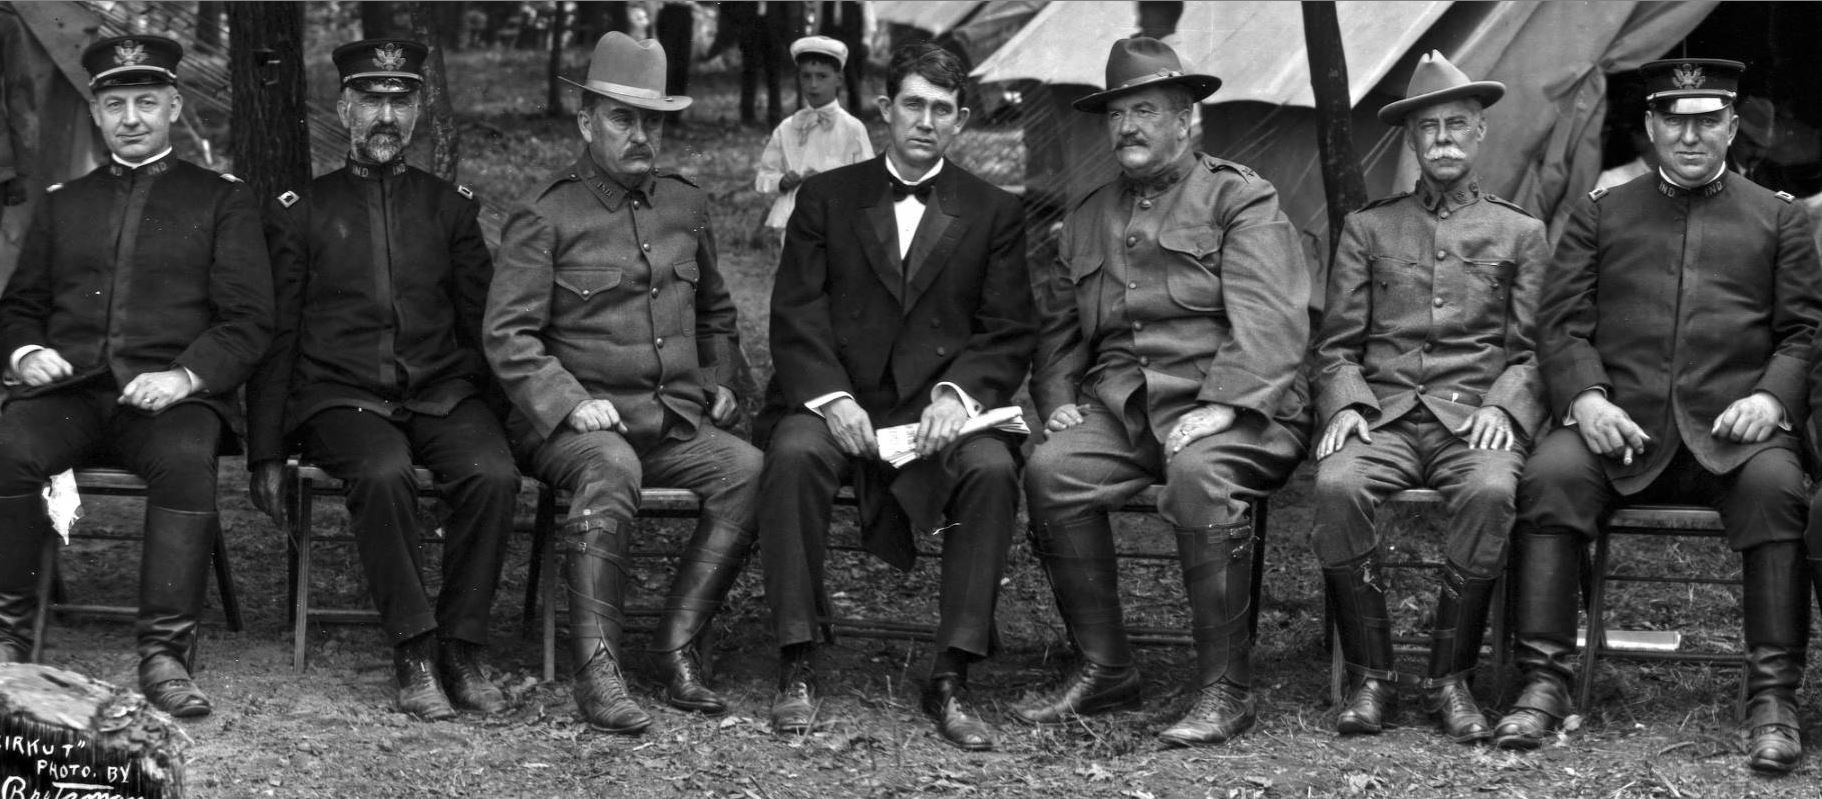 Governor J. Frank Hanly and military officers at Fort Benjamin Harrison Camp of Instruction, 1906. Courtesy of Indiana Memory.